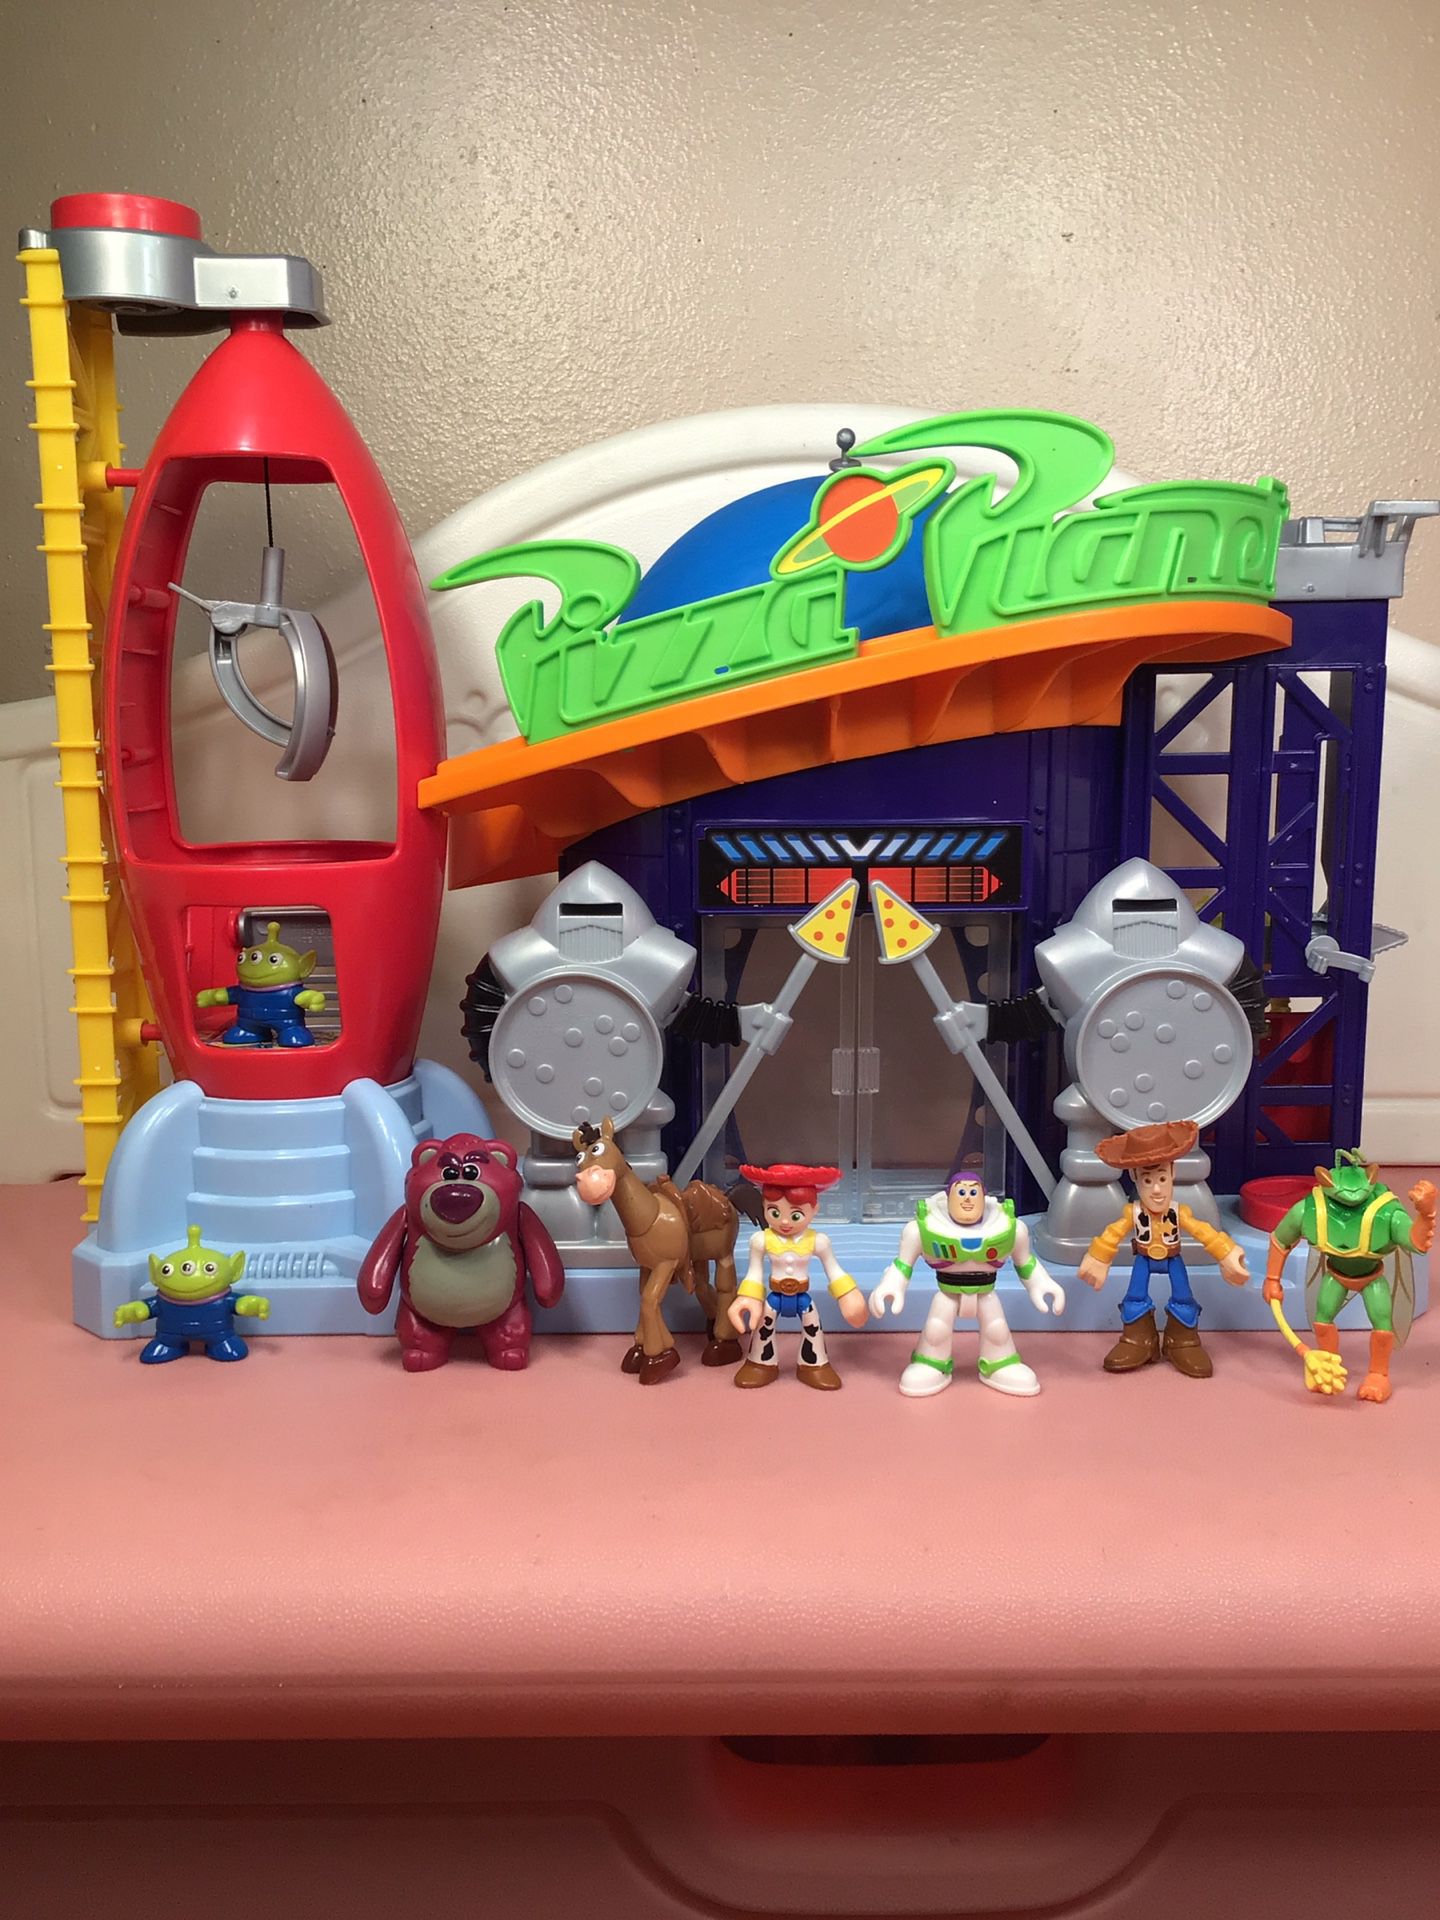 Toy Story Imaginext Pizza Planet Playset